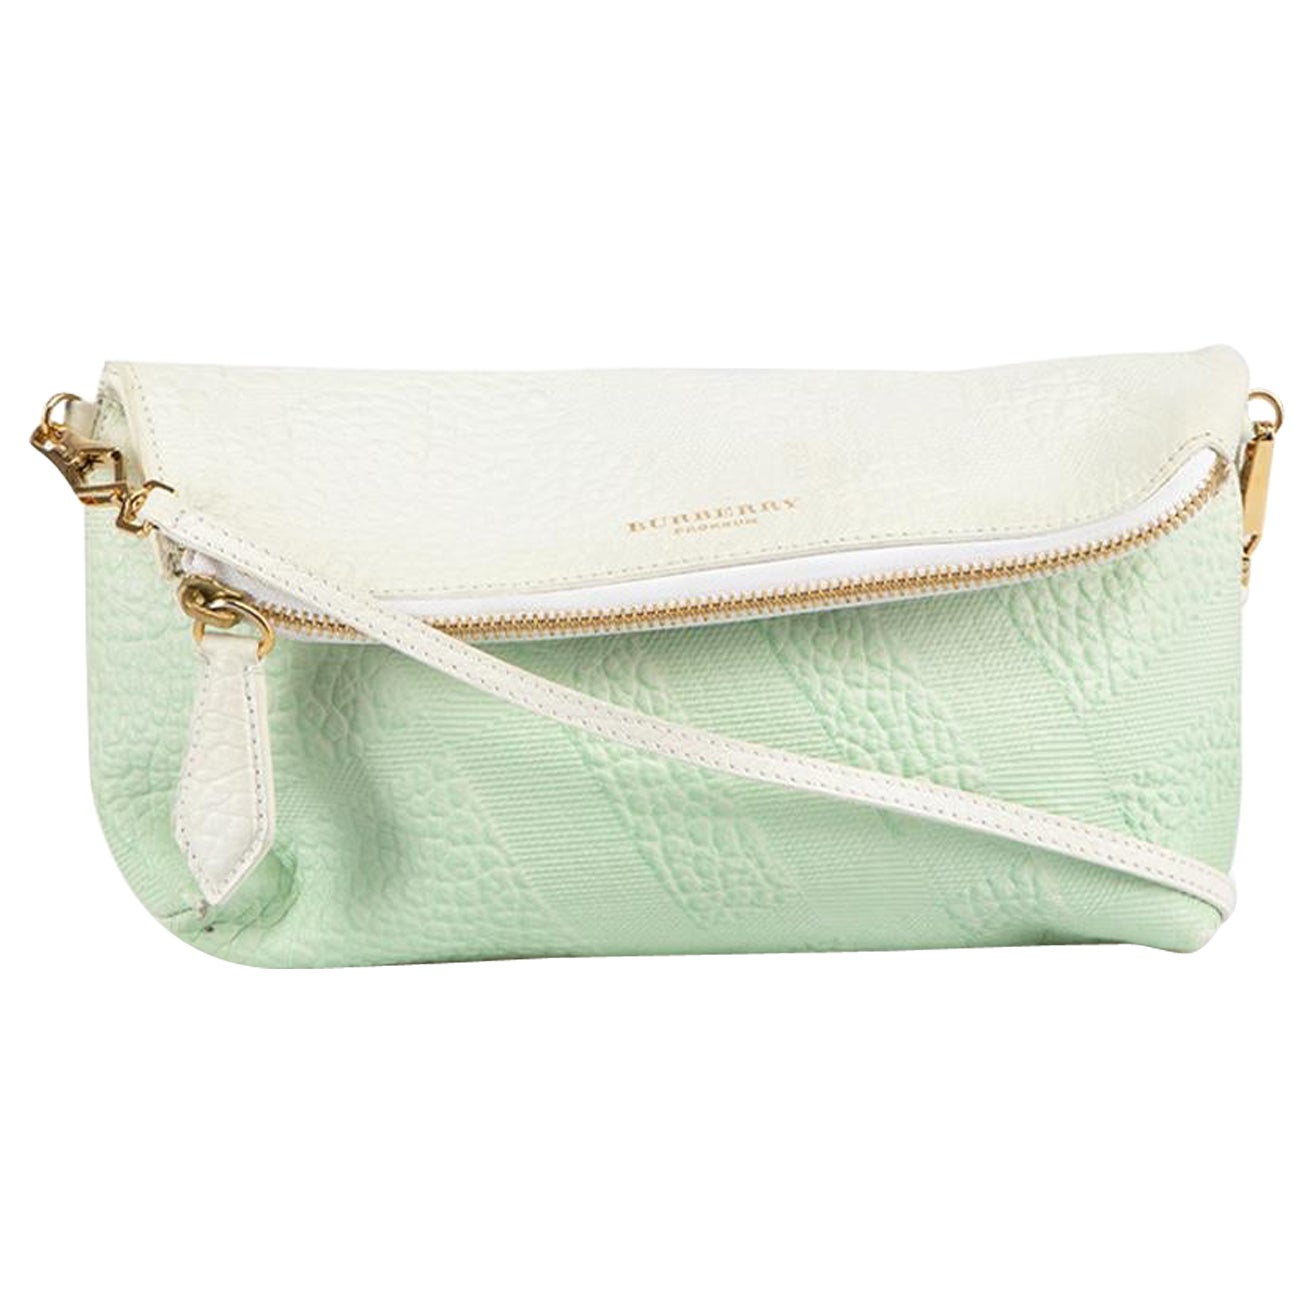 Burberry Burberry Prorsum Green Ombre Leather Crossbody Bag For Sale